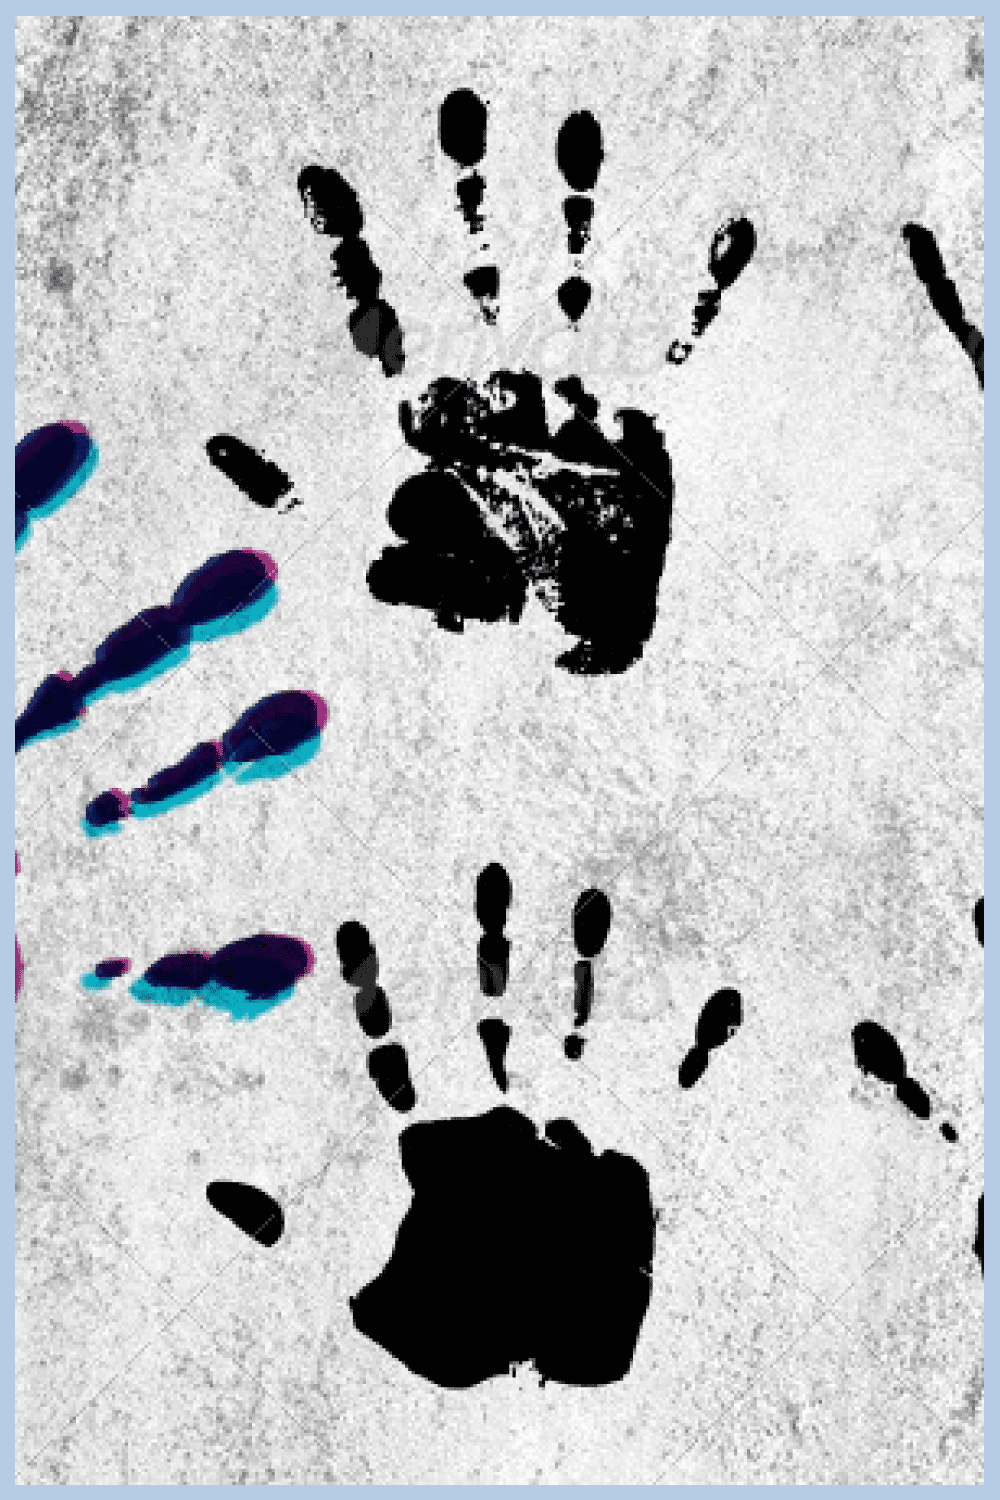 A handprint from a killer. This can be a great scary Halloween element.